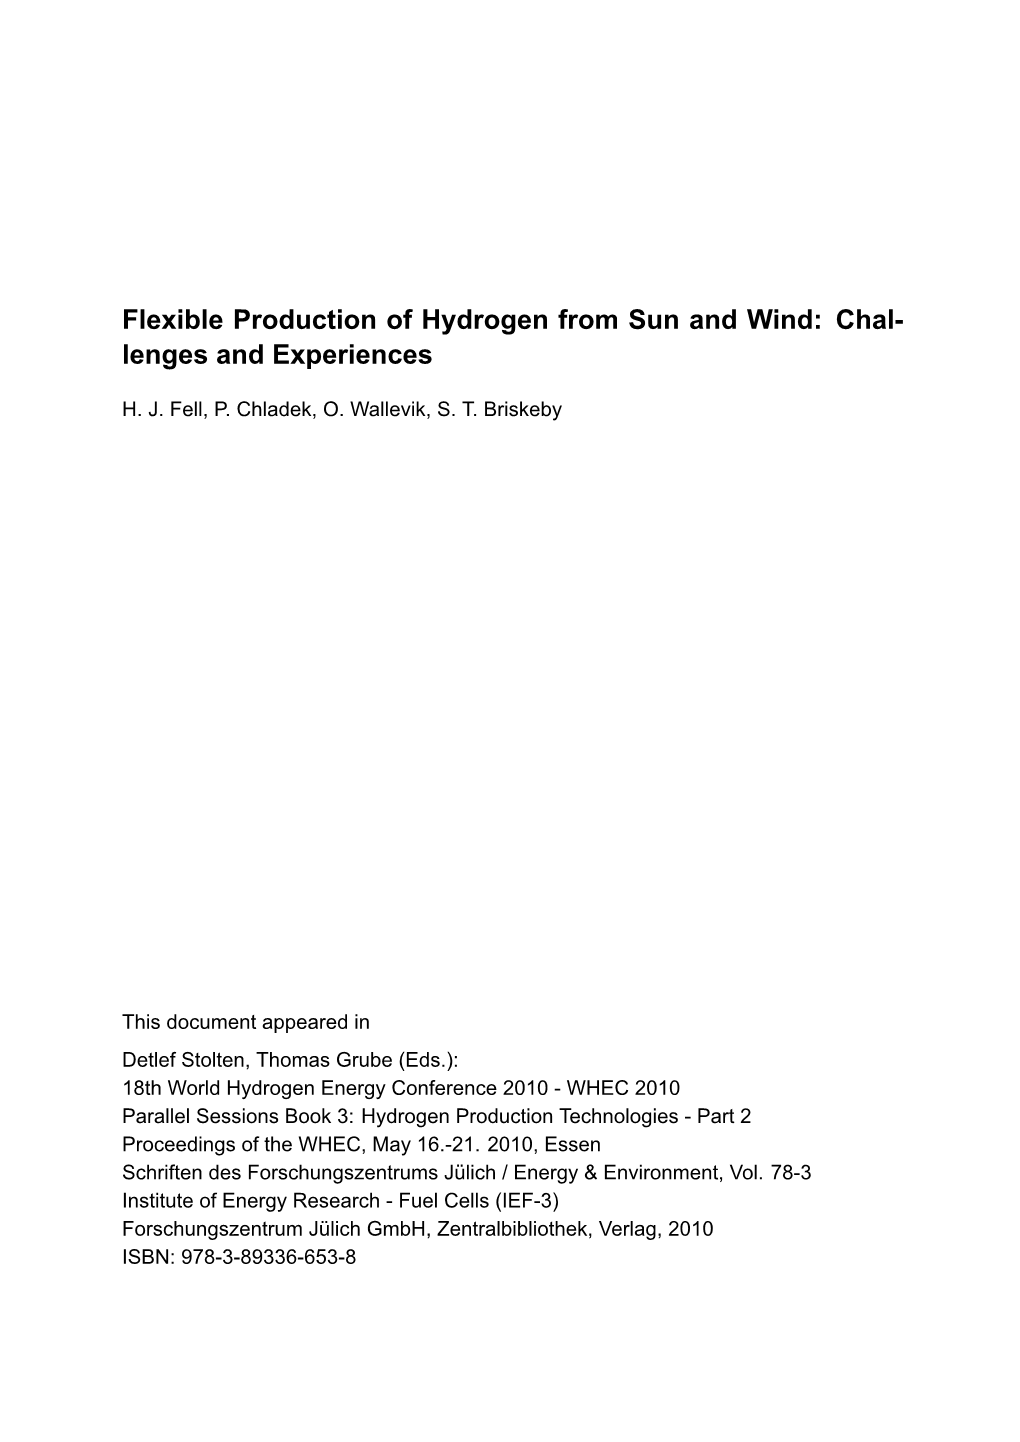 Flexible Production of Hydrogen from Sun and Wind: Challenges and Experiences